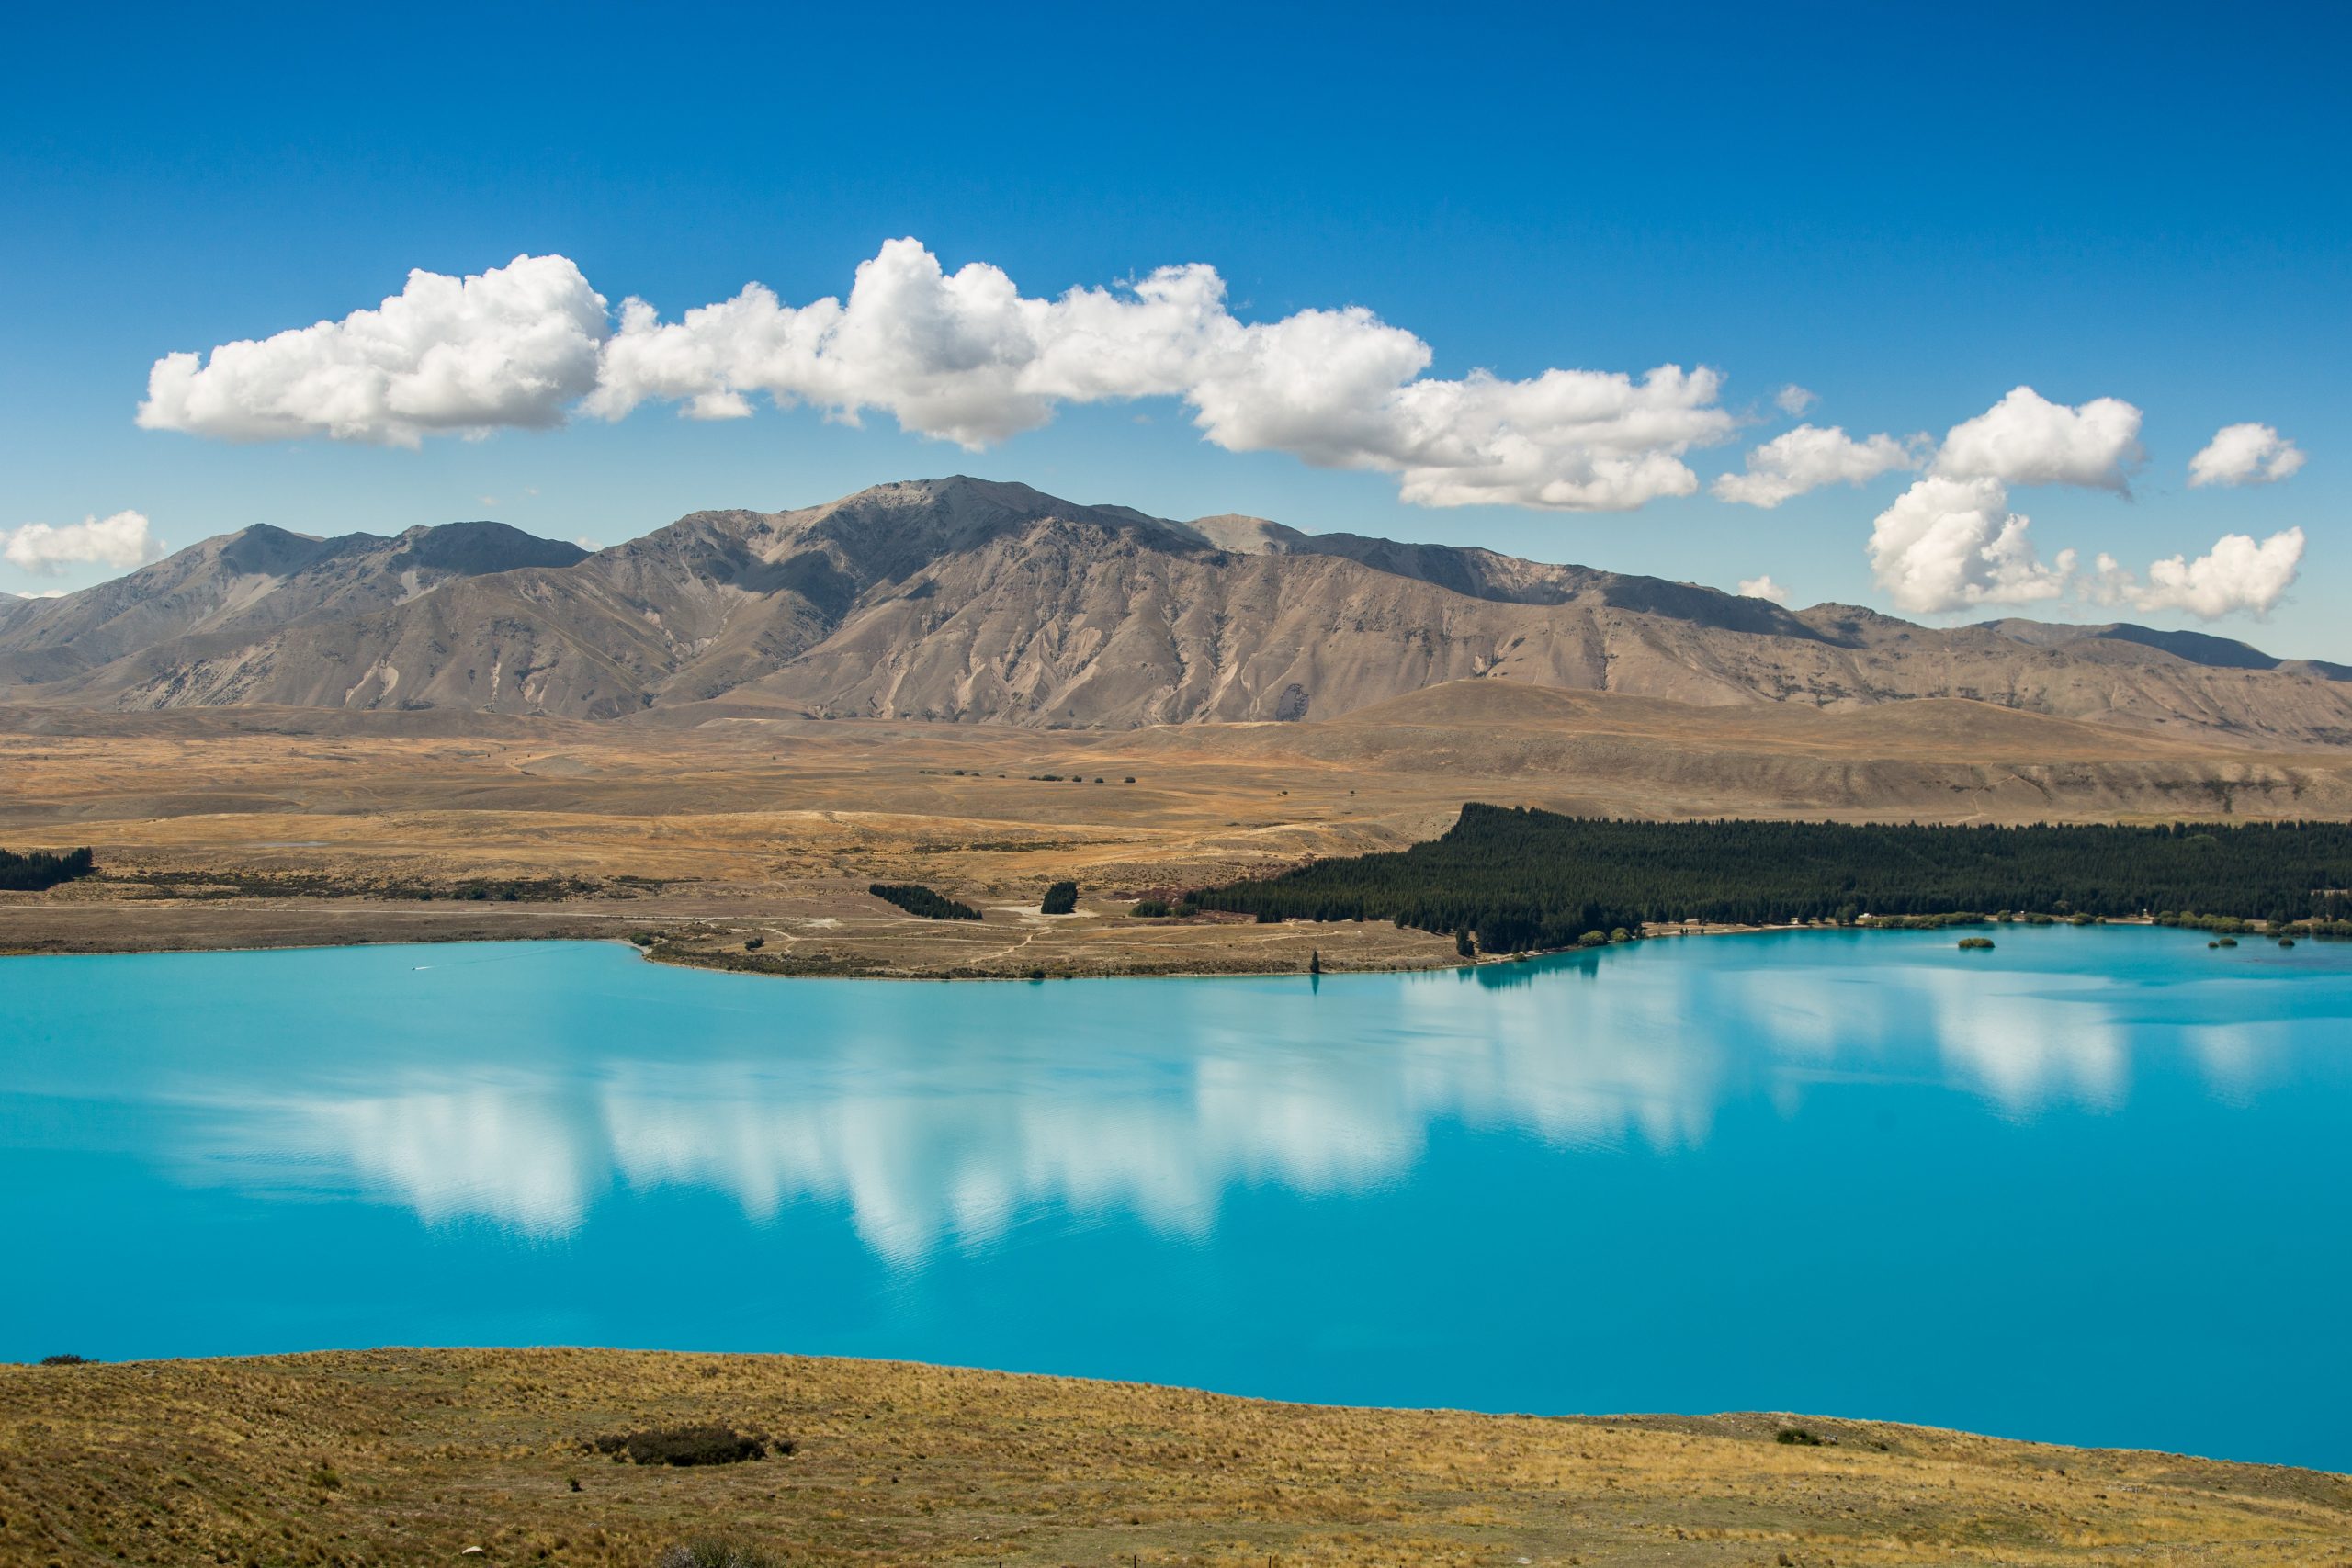 A grassy hill overlooking a bright blue lake with a mountain range in the background.